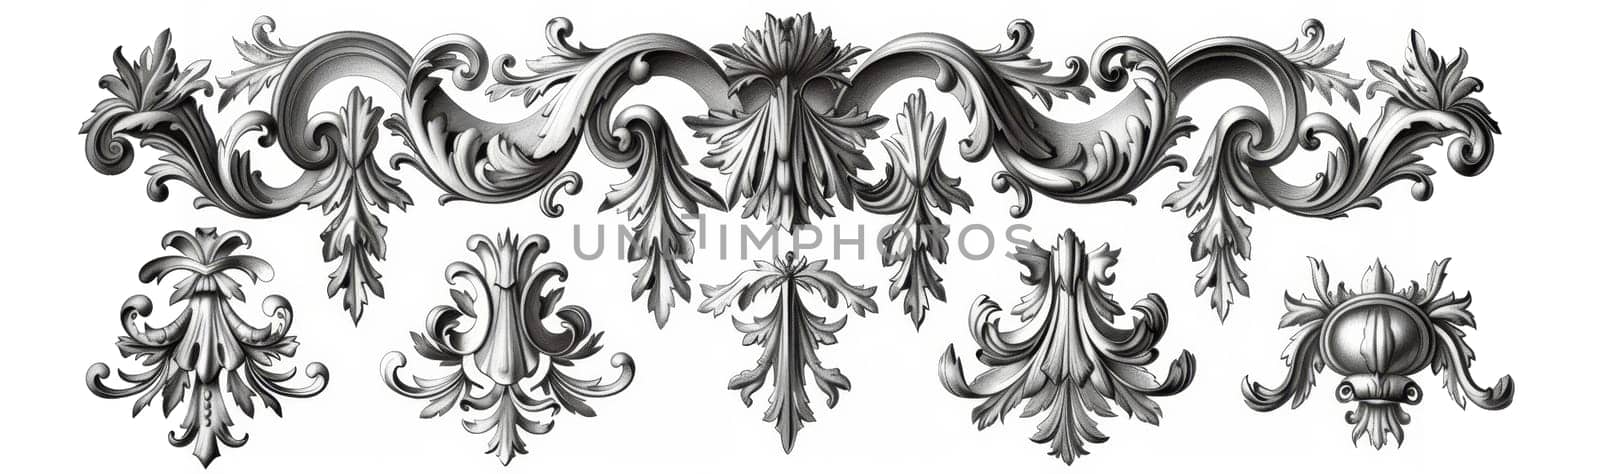 Monochrome swirls and floral patterns stretching across a white background in a seamless design